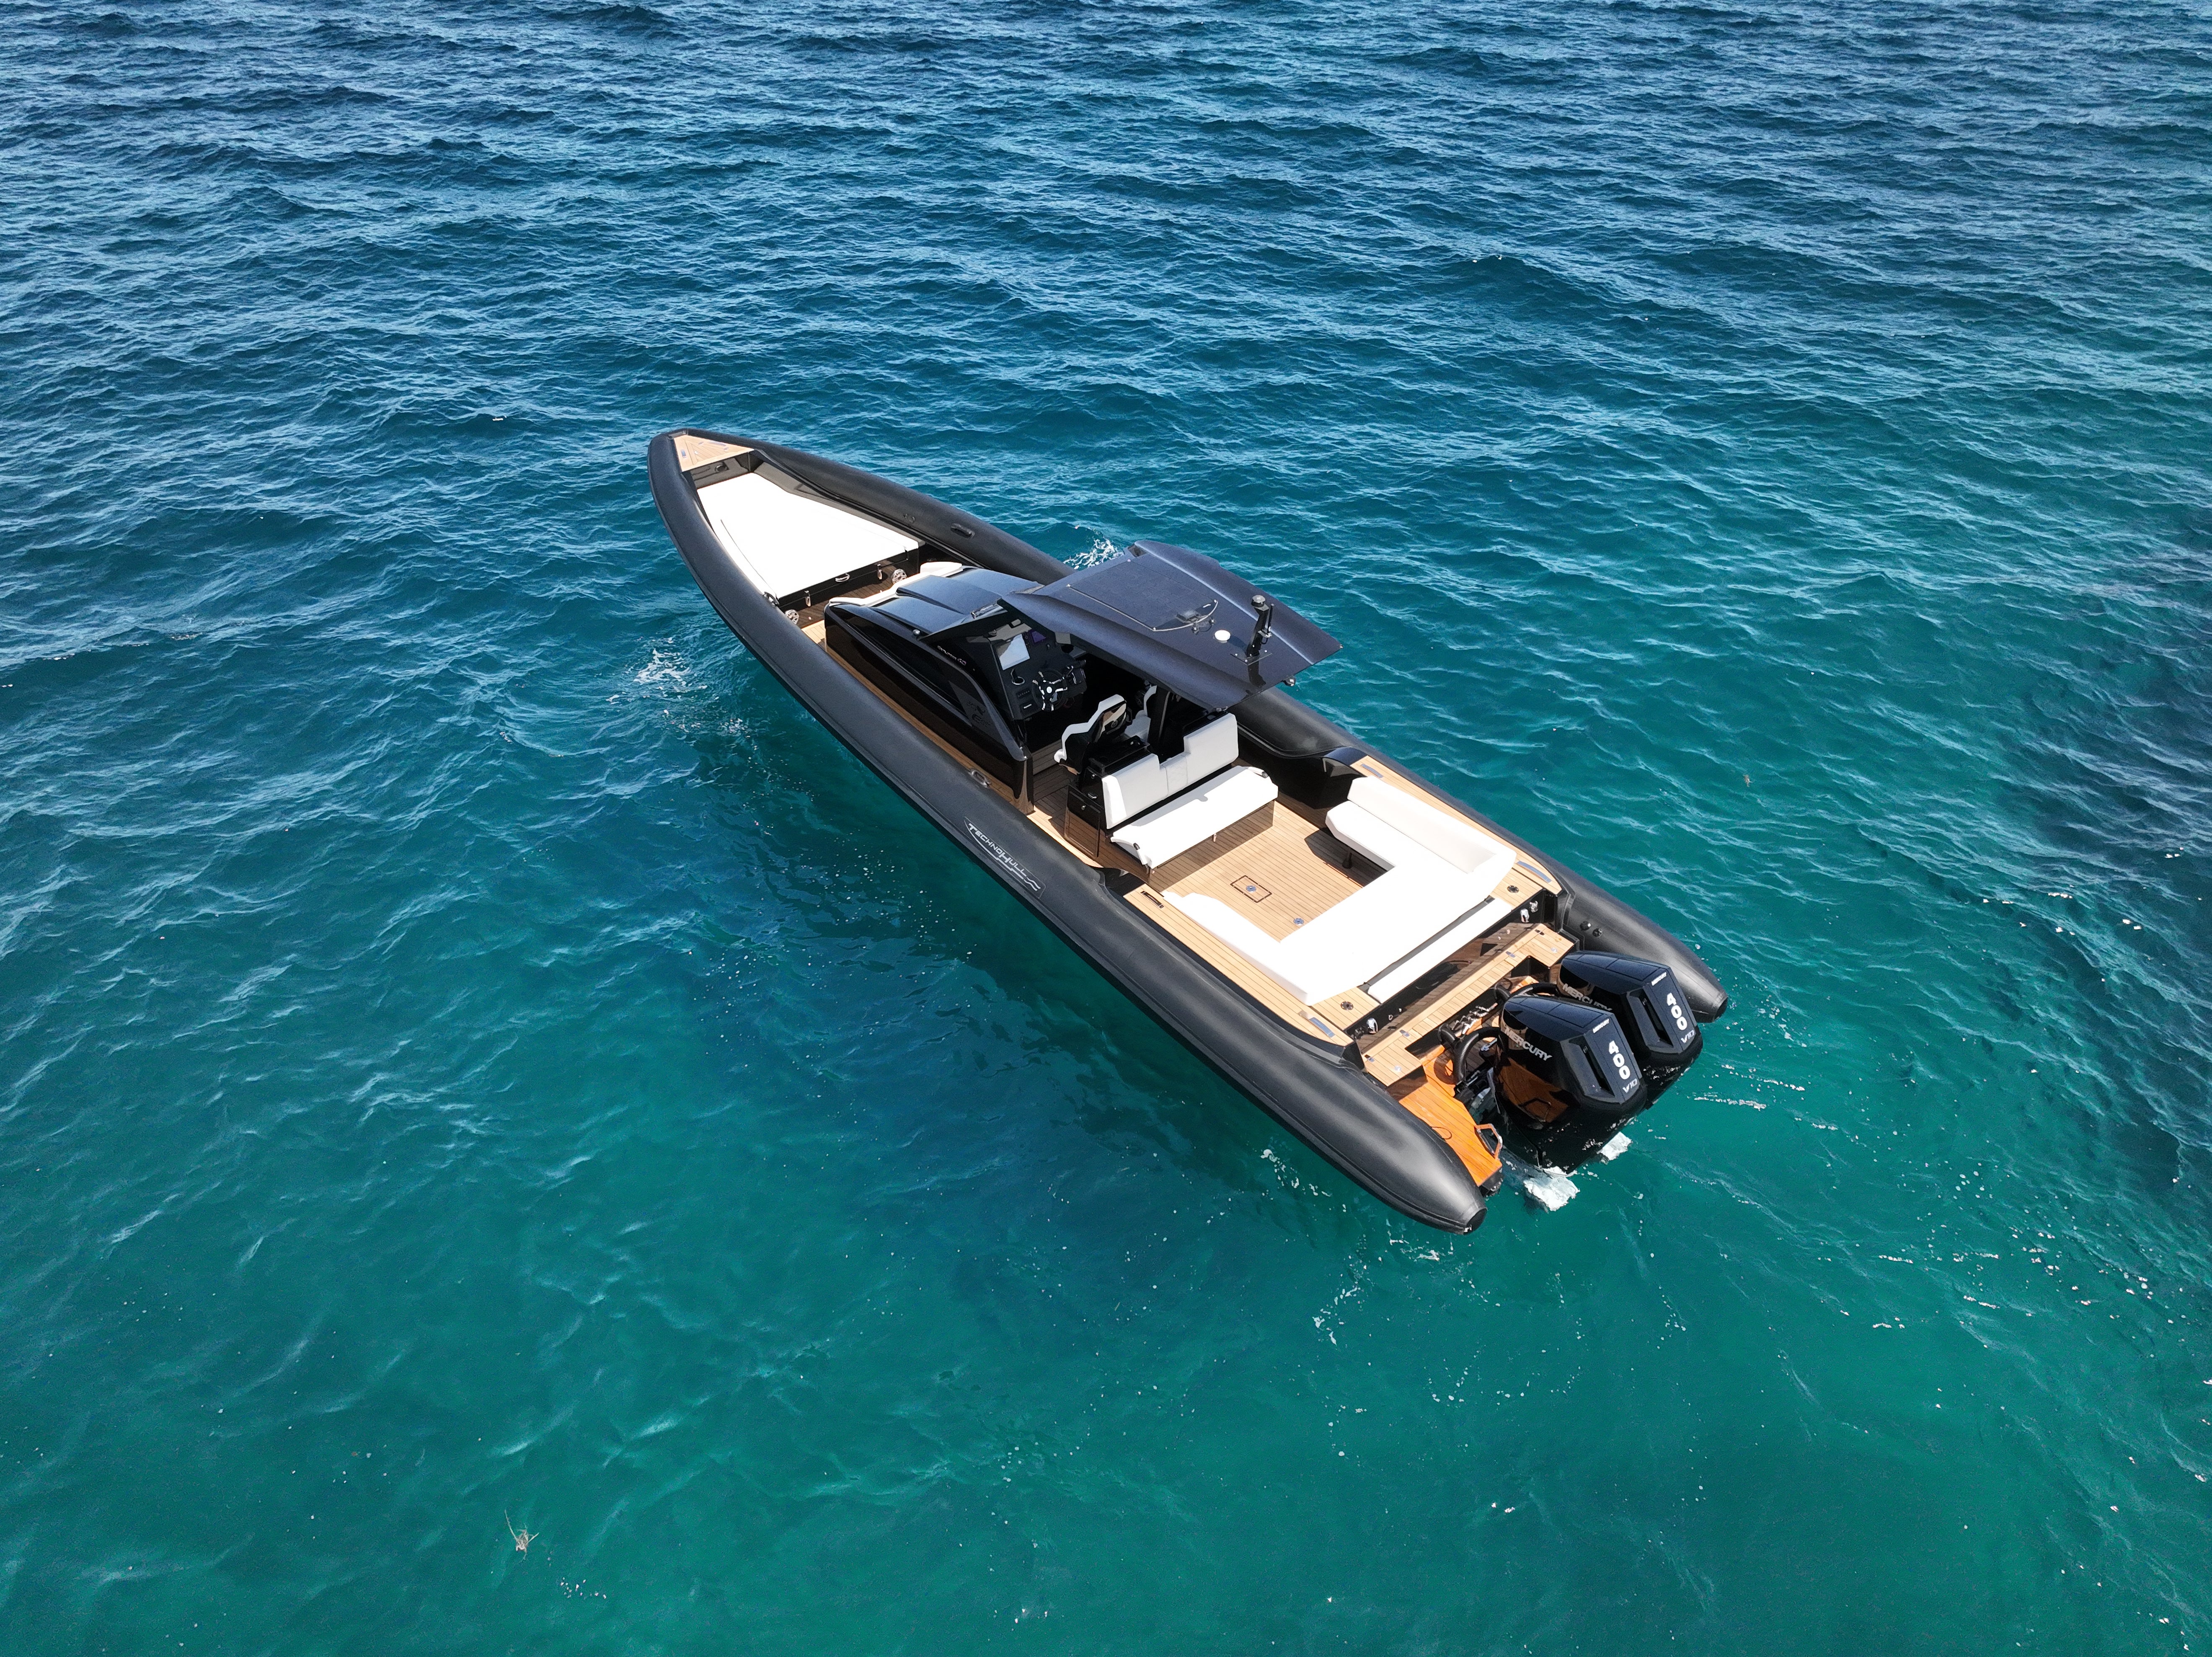 Boats like the Explorer 40 are available to hire, and open up the blue waters around the island